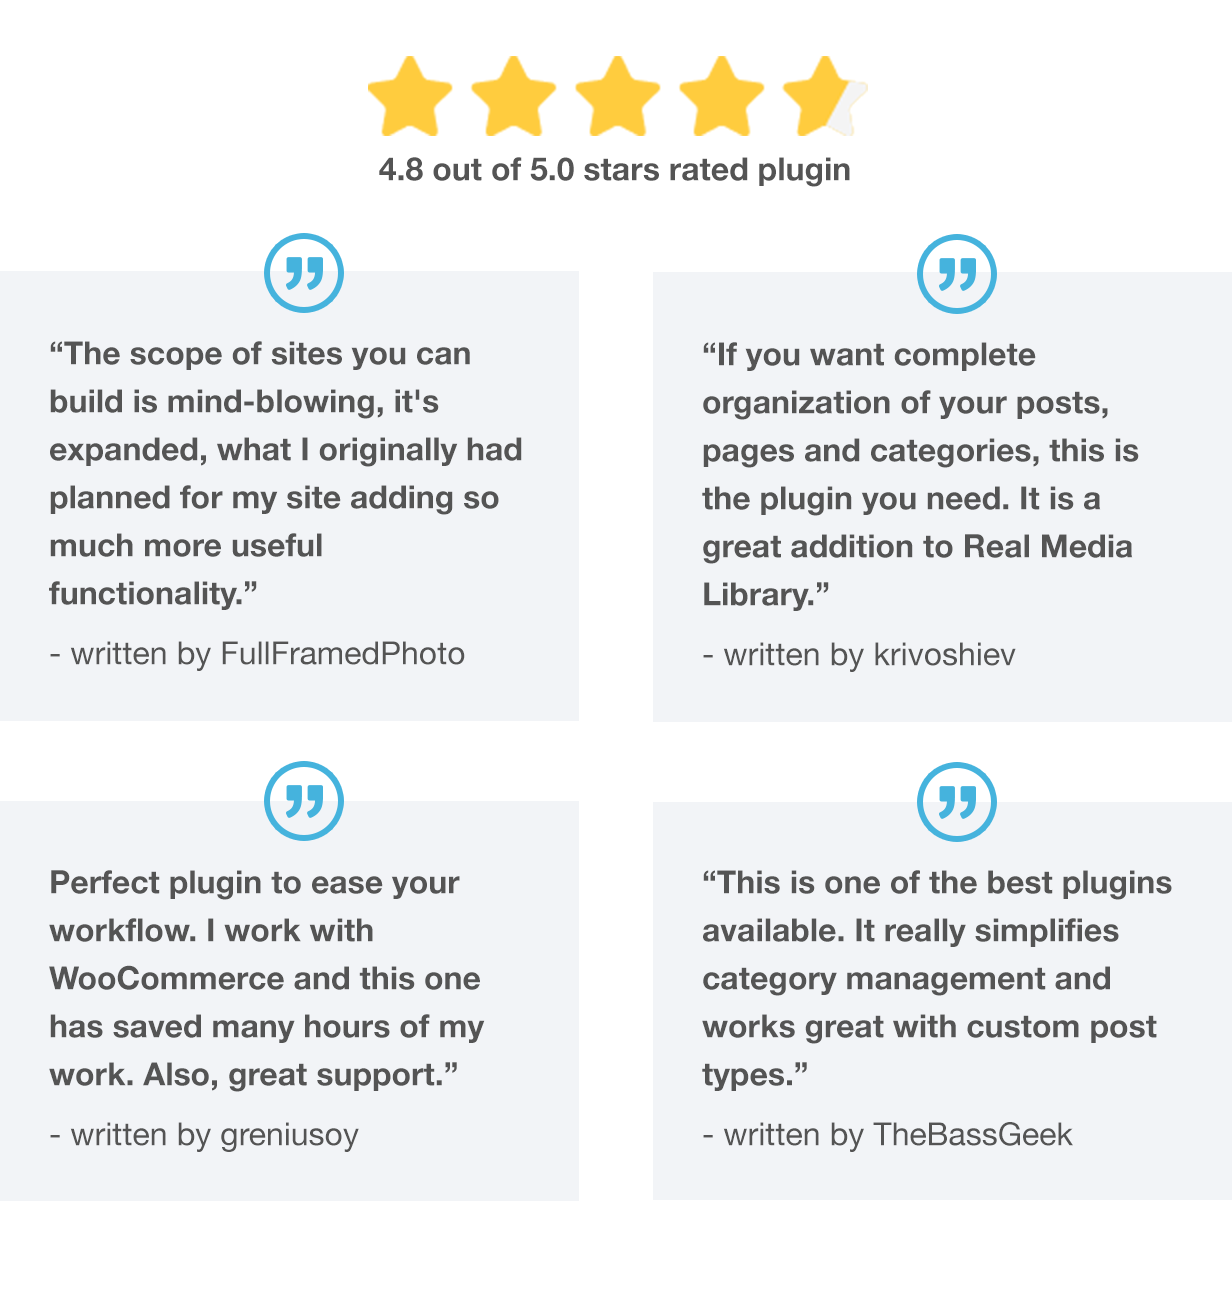 Top rated WordPress plugin: 4.8 out of 5.0 stars rated plugin. What customer says: “The scope of sites you can build is mind-blowing, it’s expanded, what I originally had planned for my site adding so much more useful functionality.” written by FullFramedPhoto; “If you want complete organization of your posts, pages and categories, this is the plugin you need. It is a great addition to Real Media Library.” written by krivoshiev; “Perfect plugin to ease your workflow. I work with WooCommerce and this one has saved many hours of my work. Also, great support.” written by greniusoy